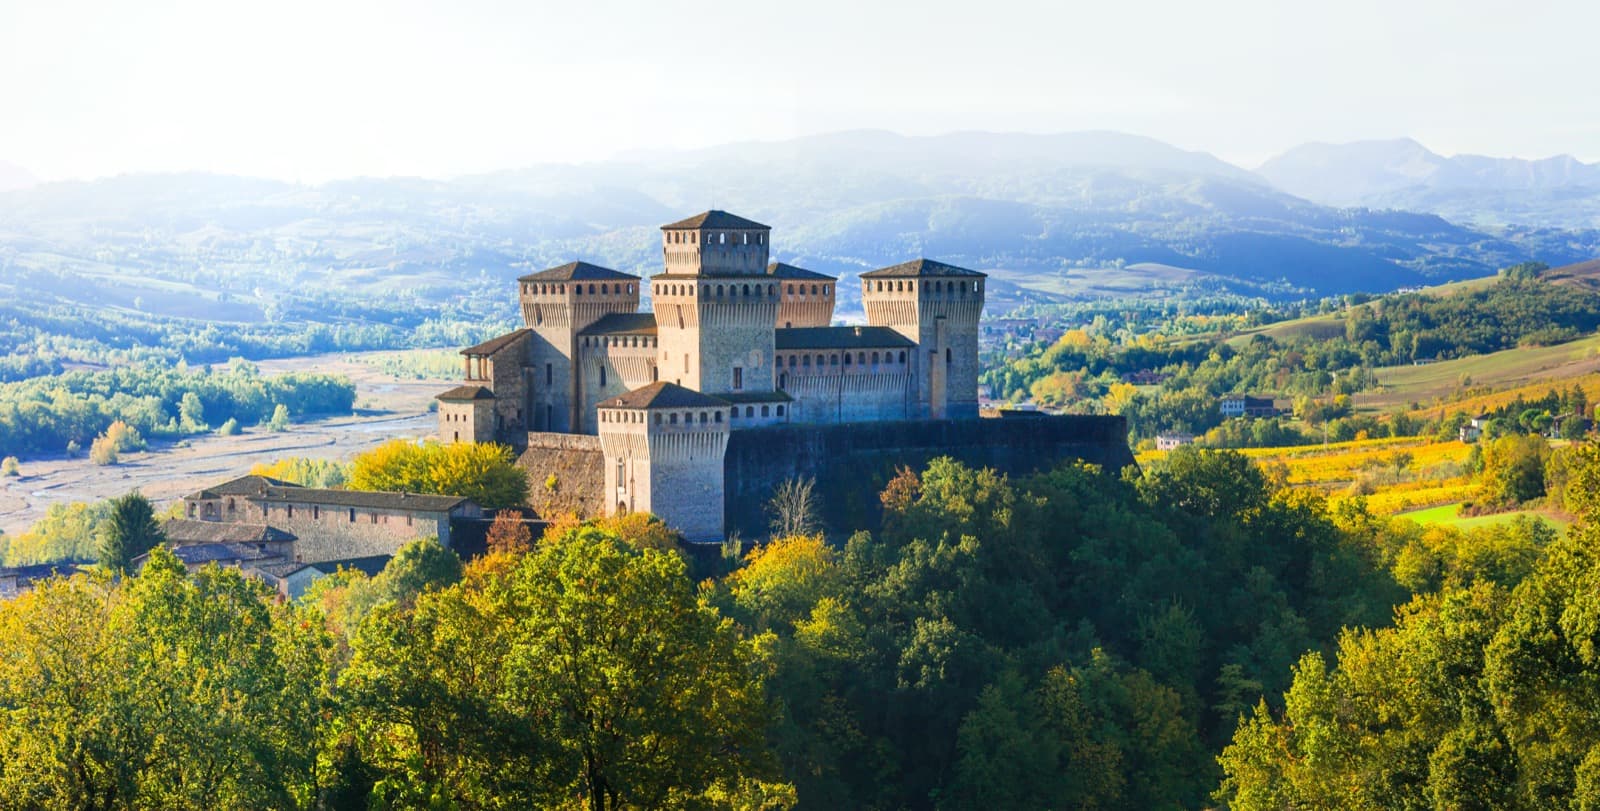 The Castle of Torrechiara (Parma, Italy), the fortress with a frescoed heart